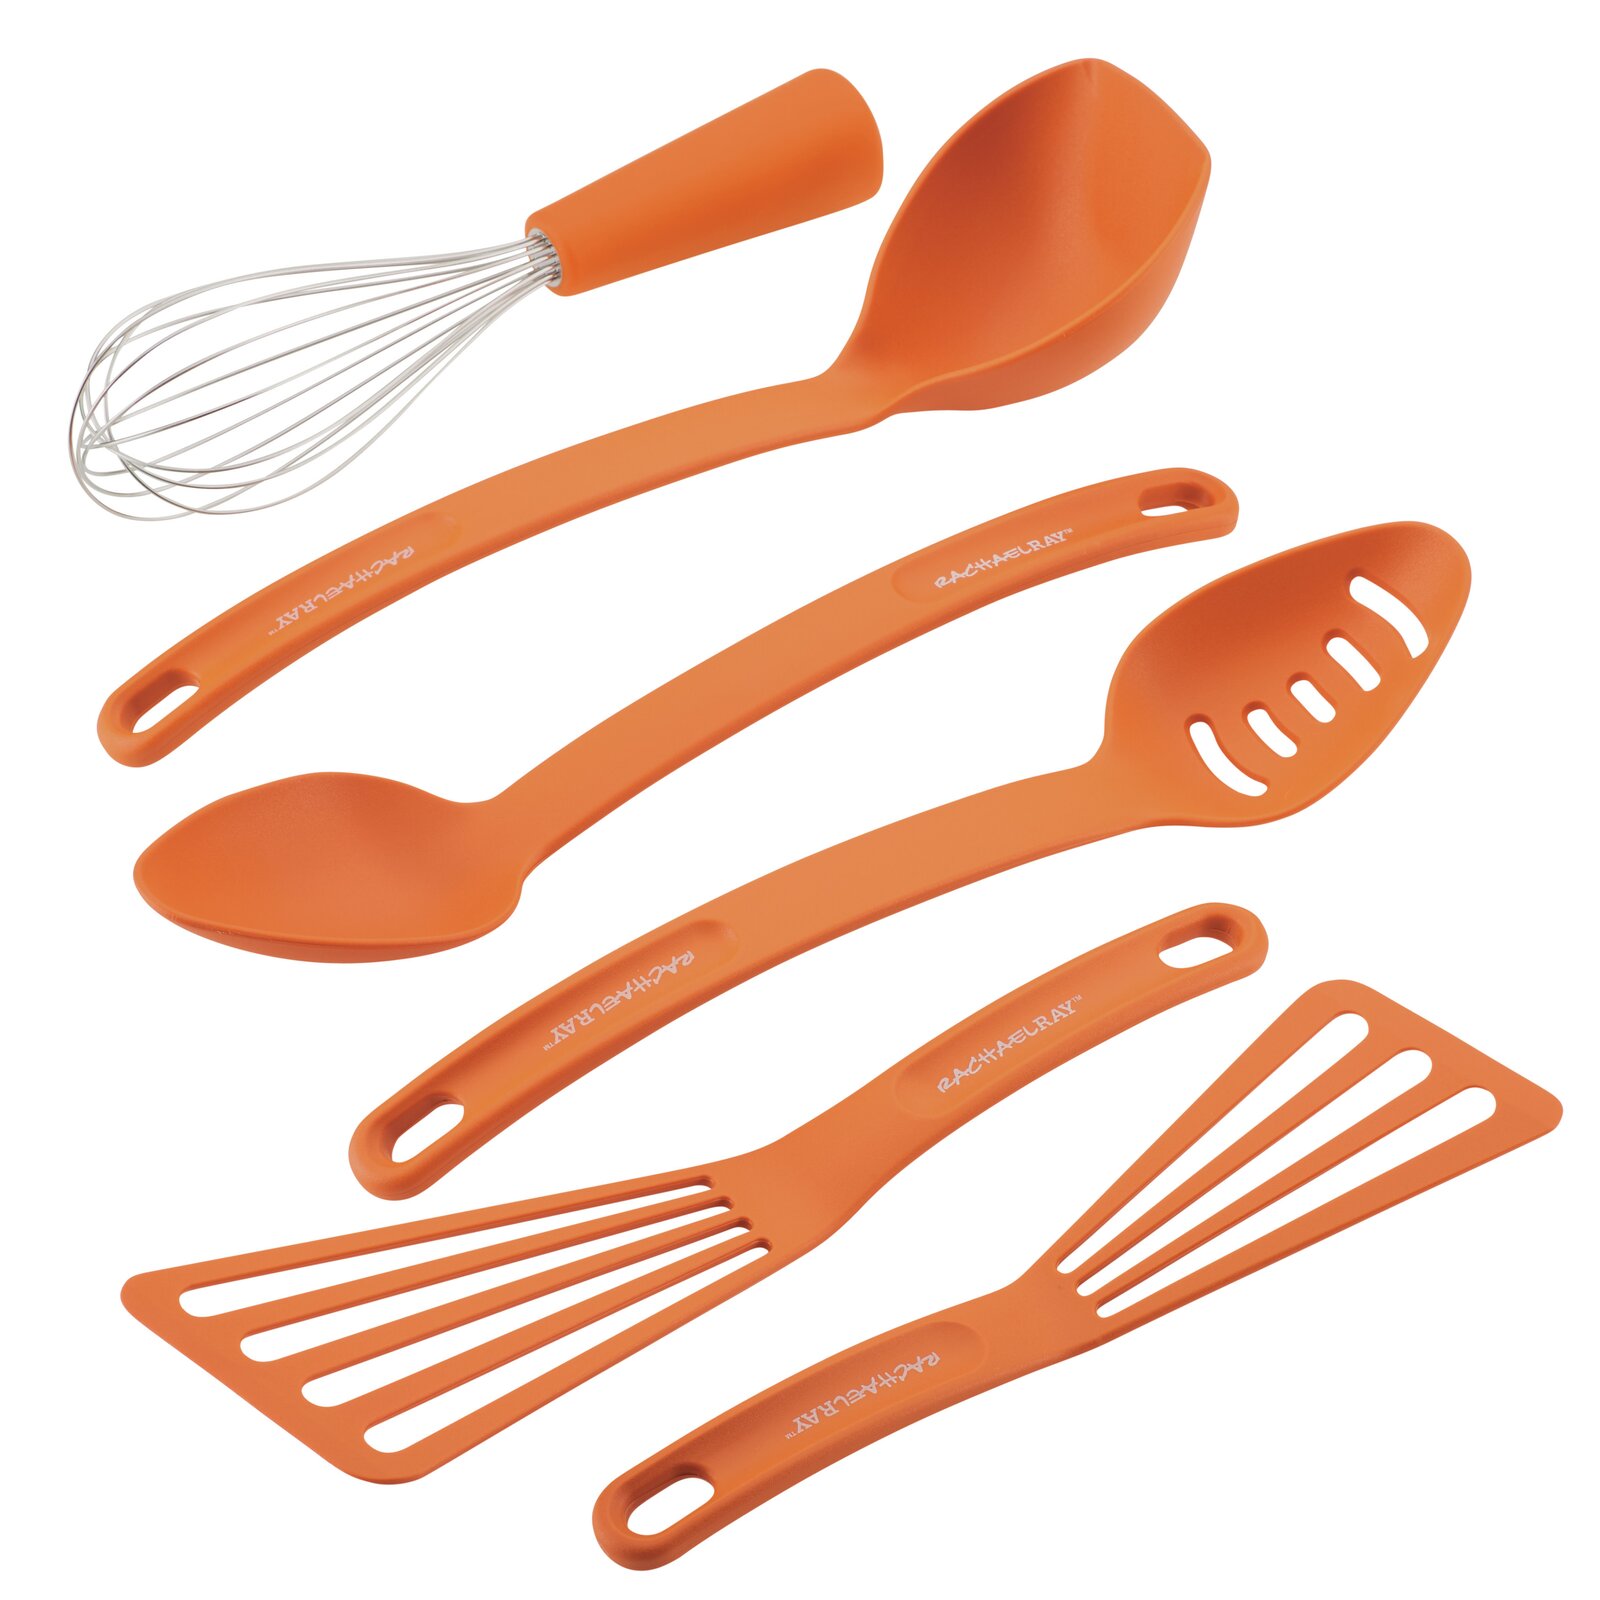 Rachael Ray Tools and Gadgets 6-Piece Kitchen Tool Set